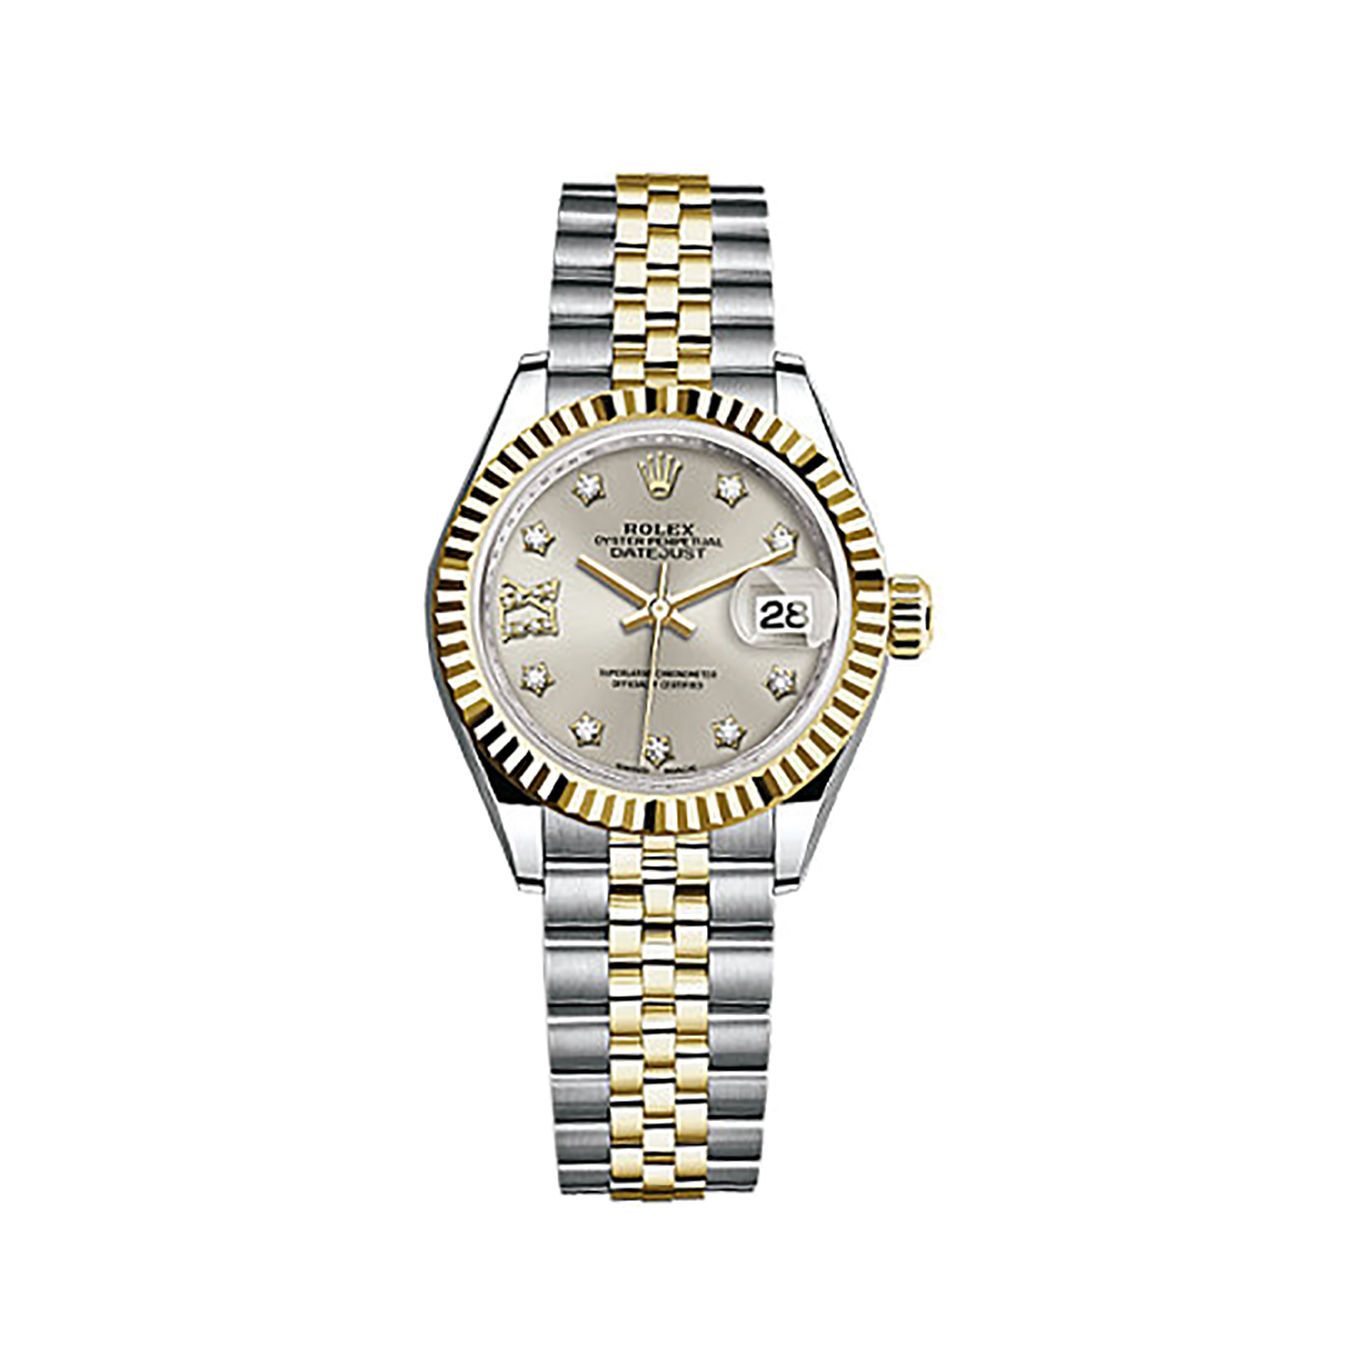 Lady-Datejust 28 279173 Gold & Stainless Steel Watch (Silver Set with Diamonds) - Click Image to Close